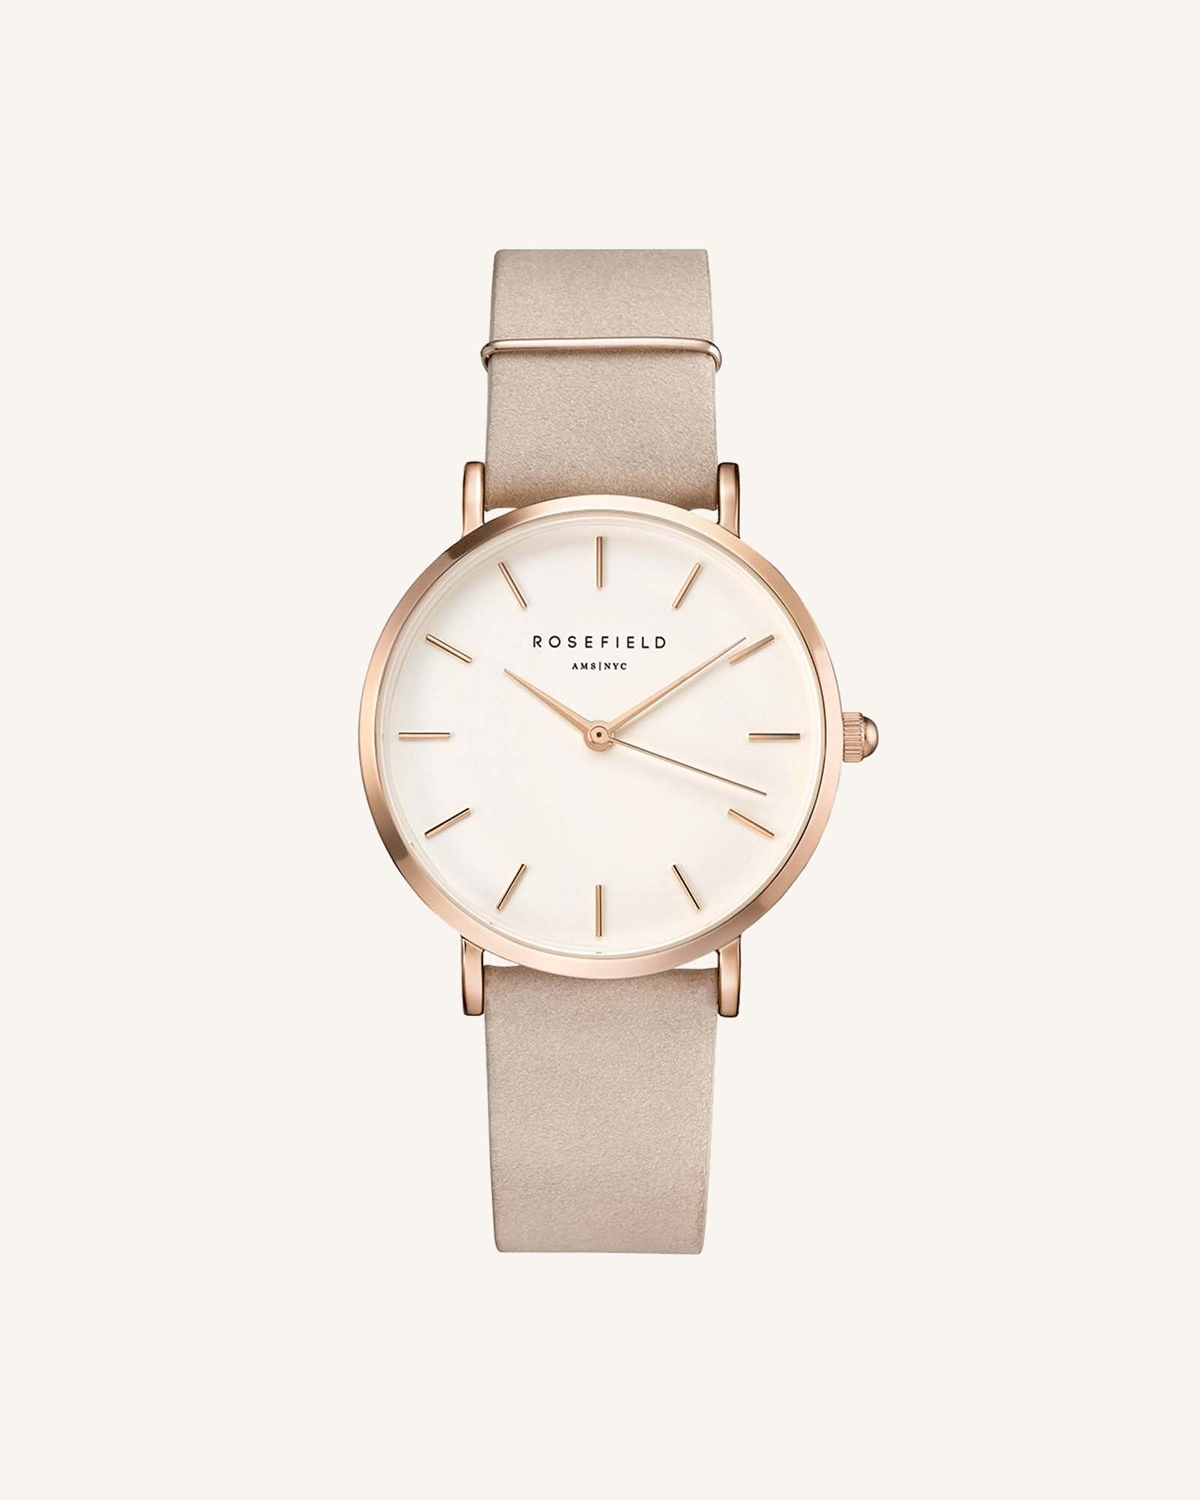 ROSEFIELD ローズフィールド The West Village Soft Pink Rose gold 33mm